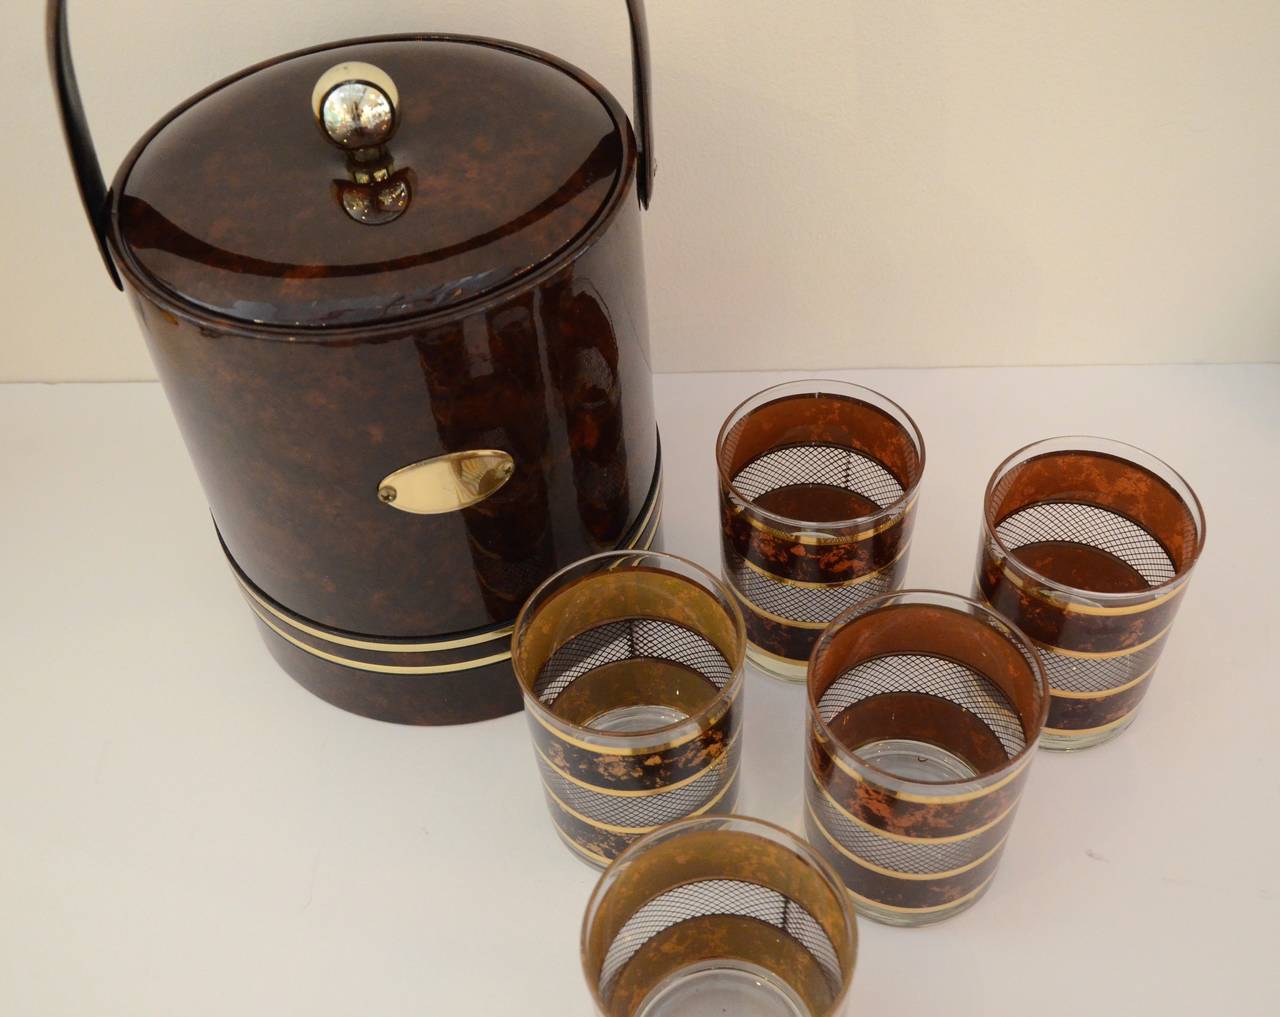 Georges Briard faux tortoiseshell and gold band ice bucket with set of five coordinating faux tortoise and gold band tumblers. Ice bucket is 8.5